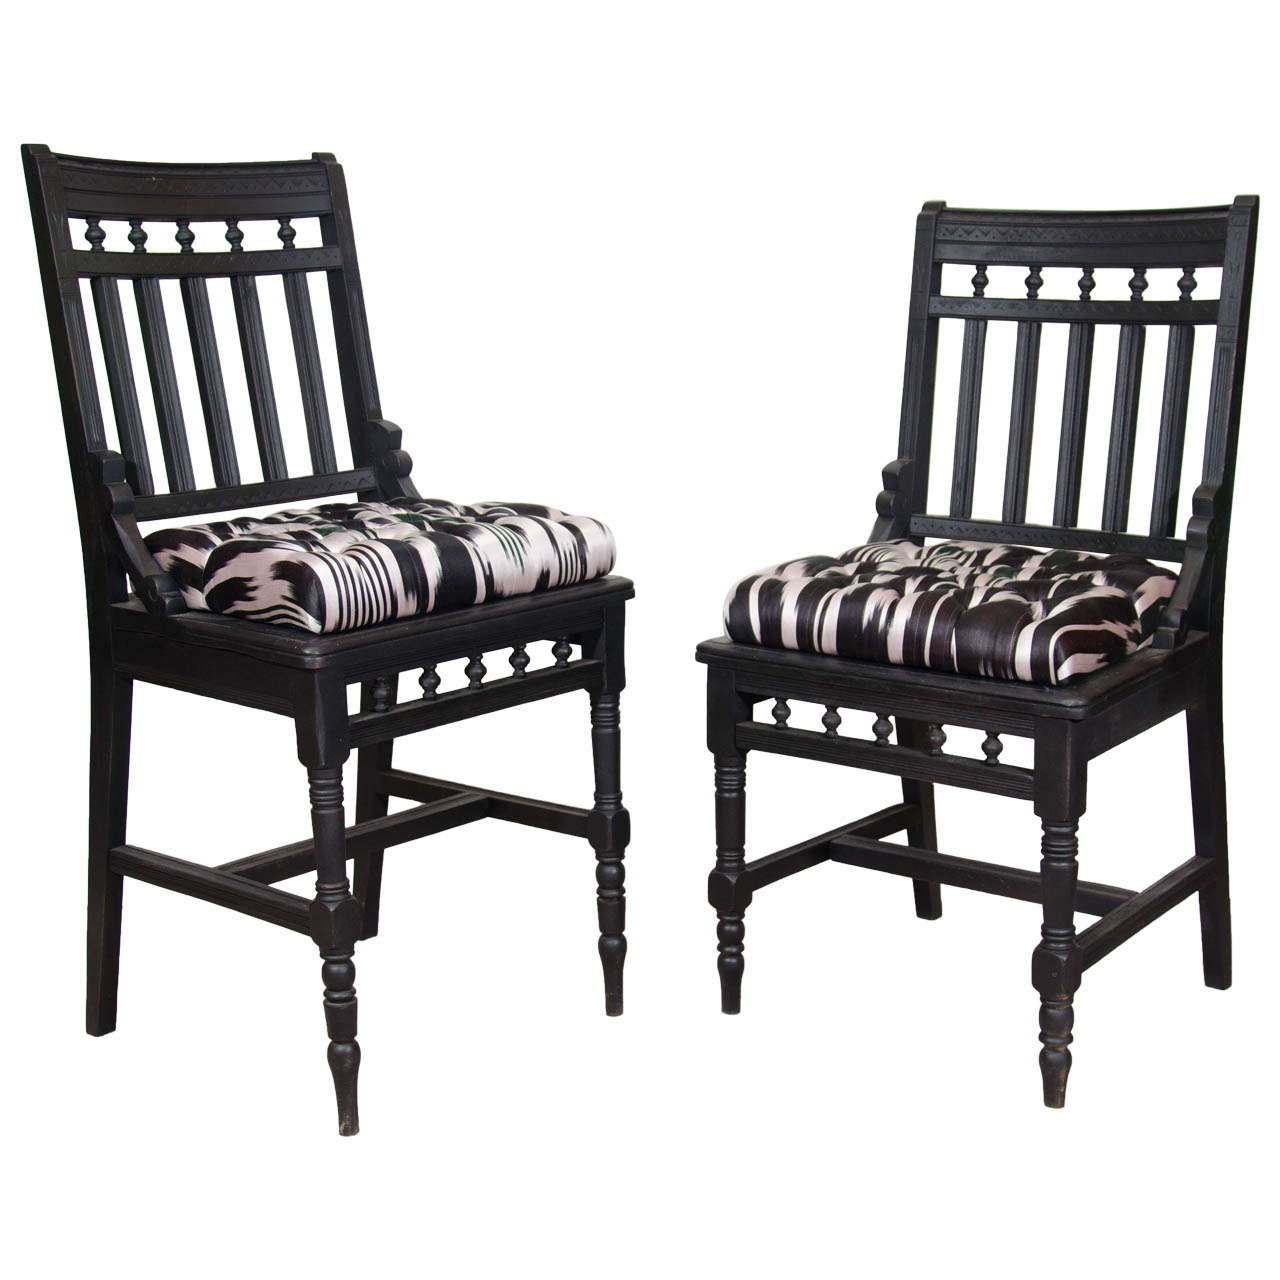 An Antique Set of His And Hers Eastlake Side Chairs at 1stdibs